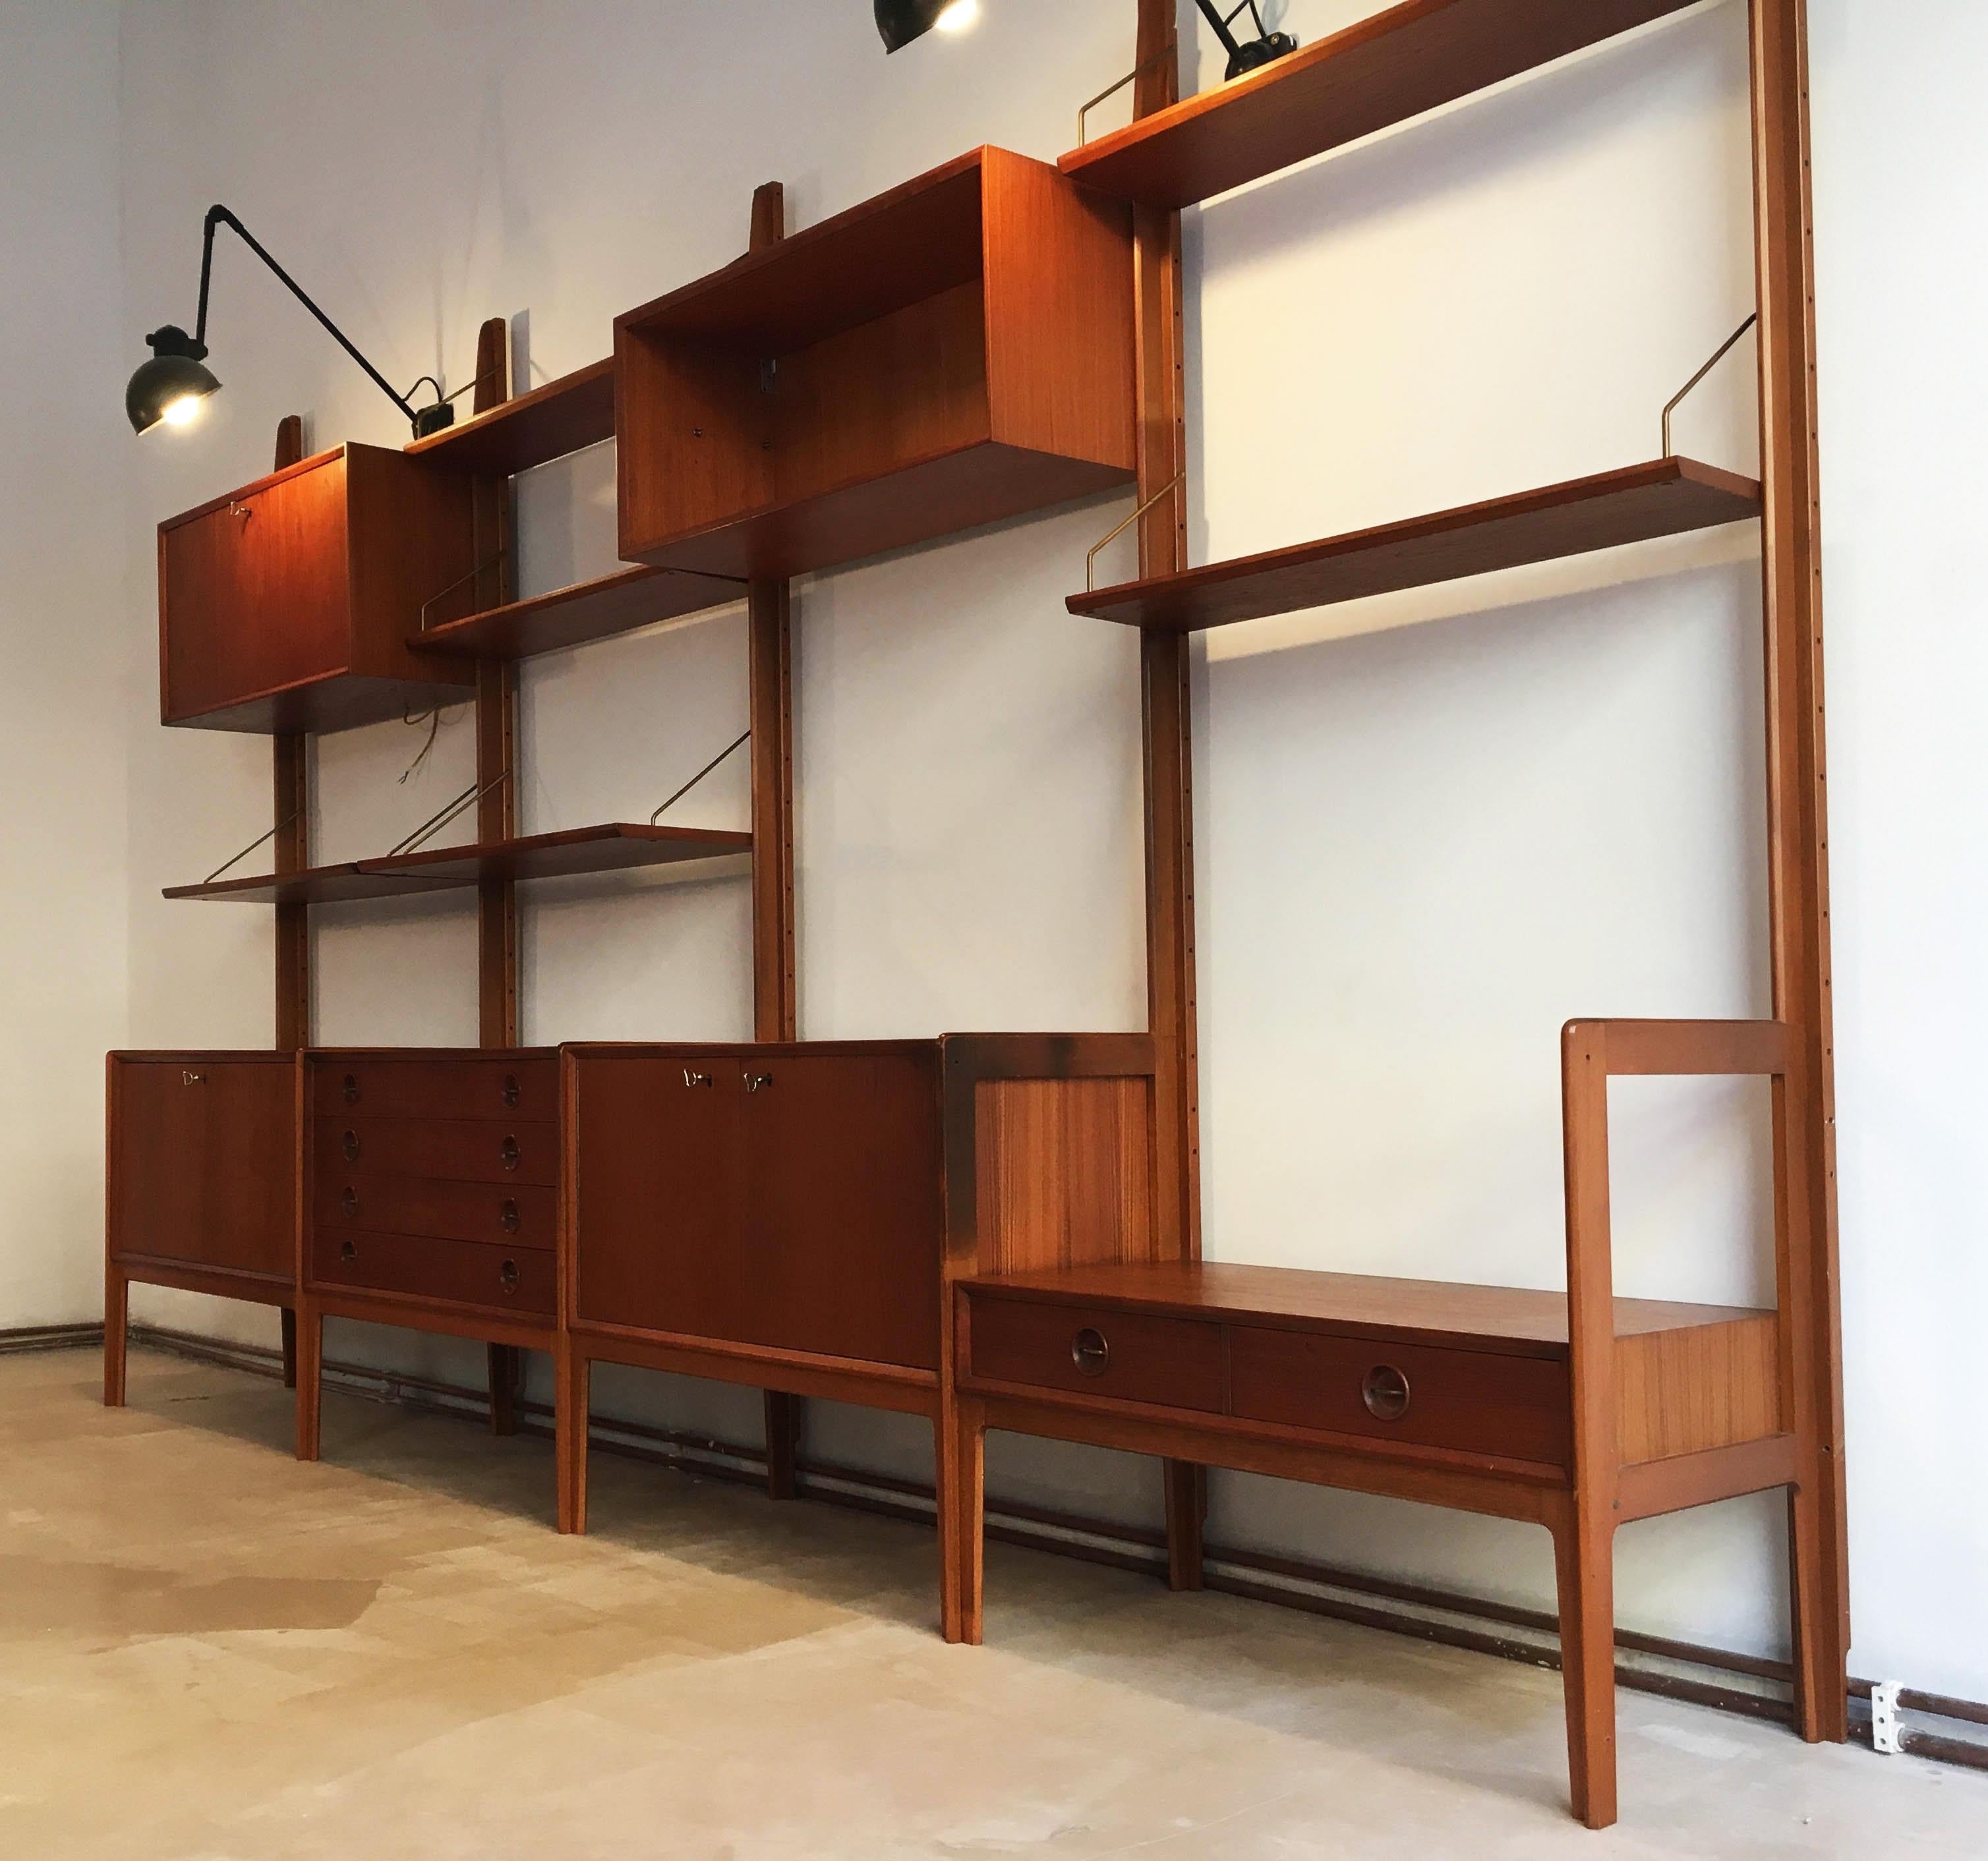 Mid-20th Century Freestanding teak wall unit by Fredrik A. Kayser for Gustav Bahus, Norway, 1960s For Sale